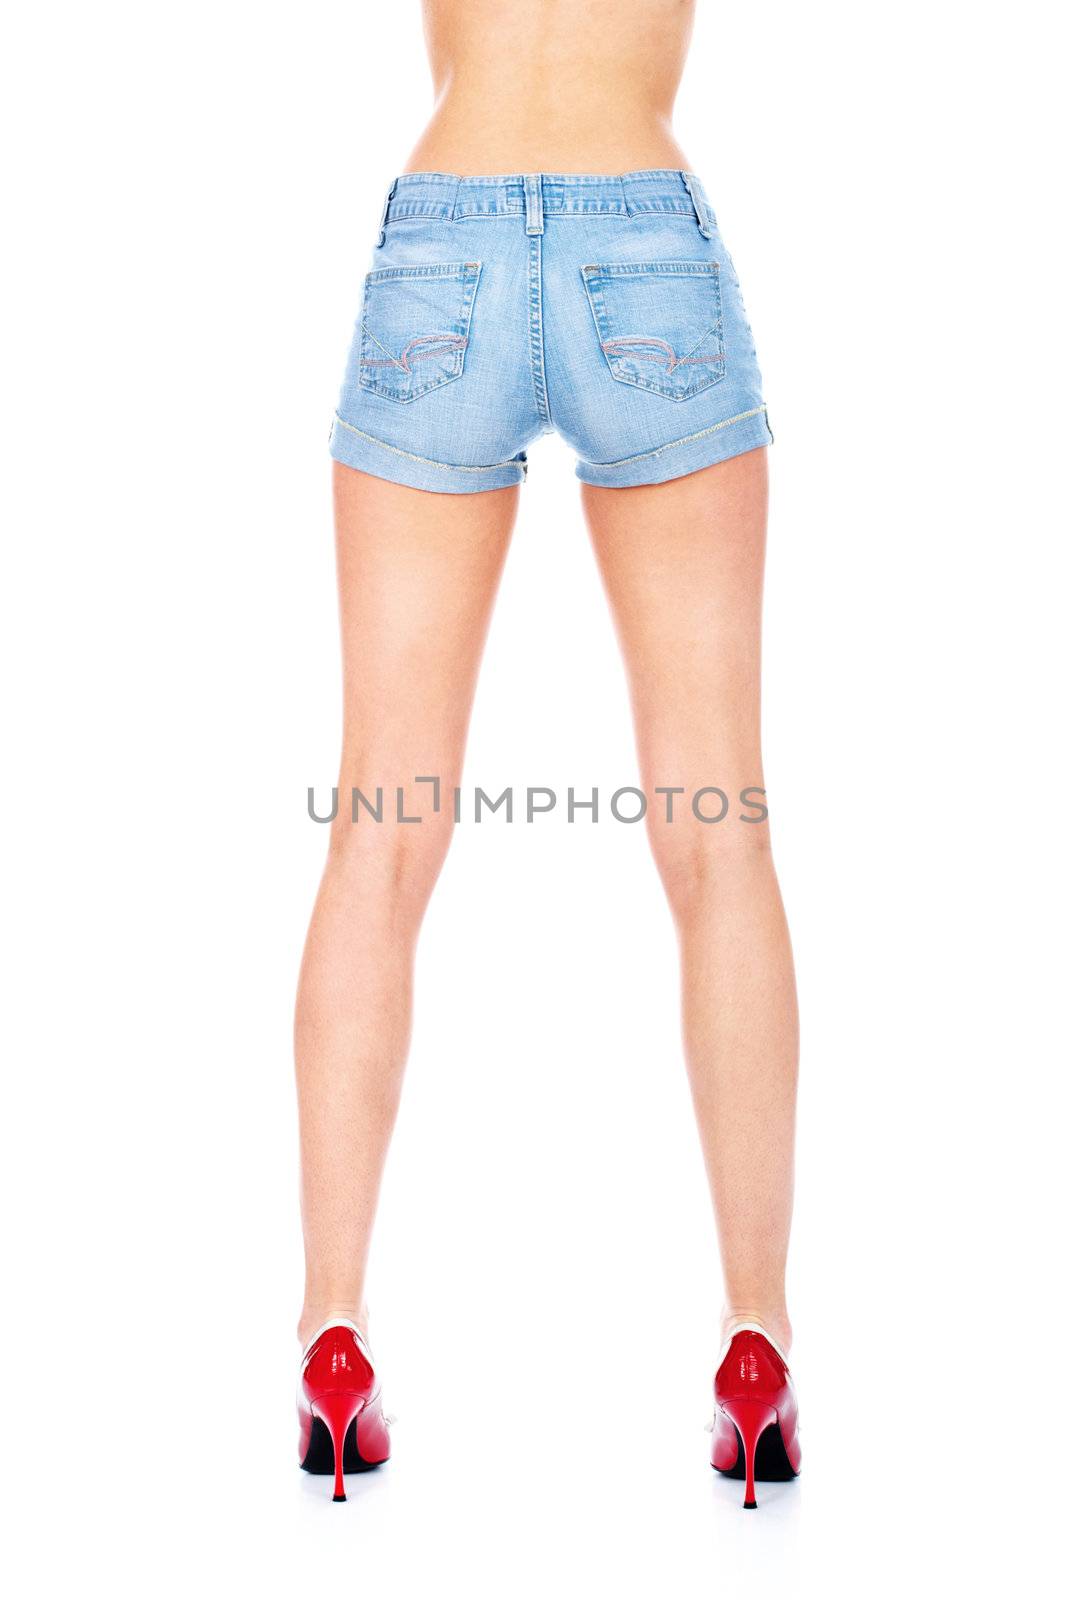 Blue shorts and woman legs in red shoes, isolated on white